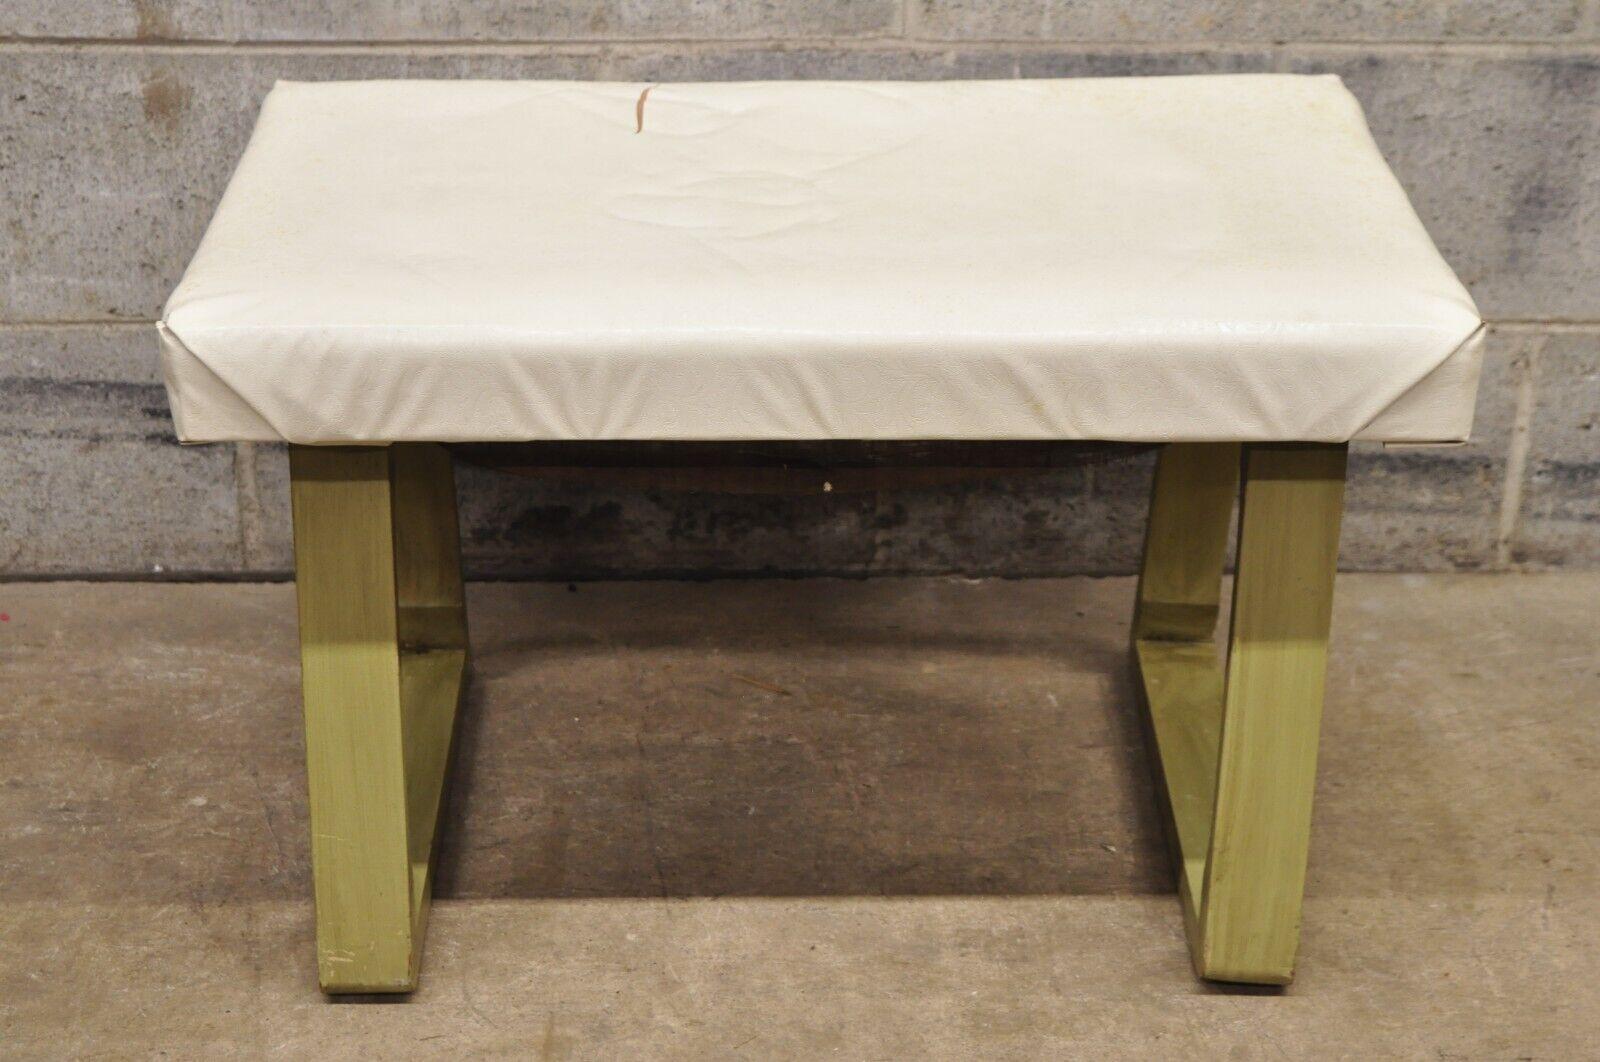 Vintage Mid-Century Modern Green Painted Art Deco Vanity Bench. Item features a green cerused painted finish, solid wood frame, beautiful wood grain, very nice vintage item, clean modernist lines. Circa Mid 20th Century. Measurements: 16.5